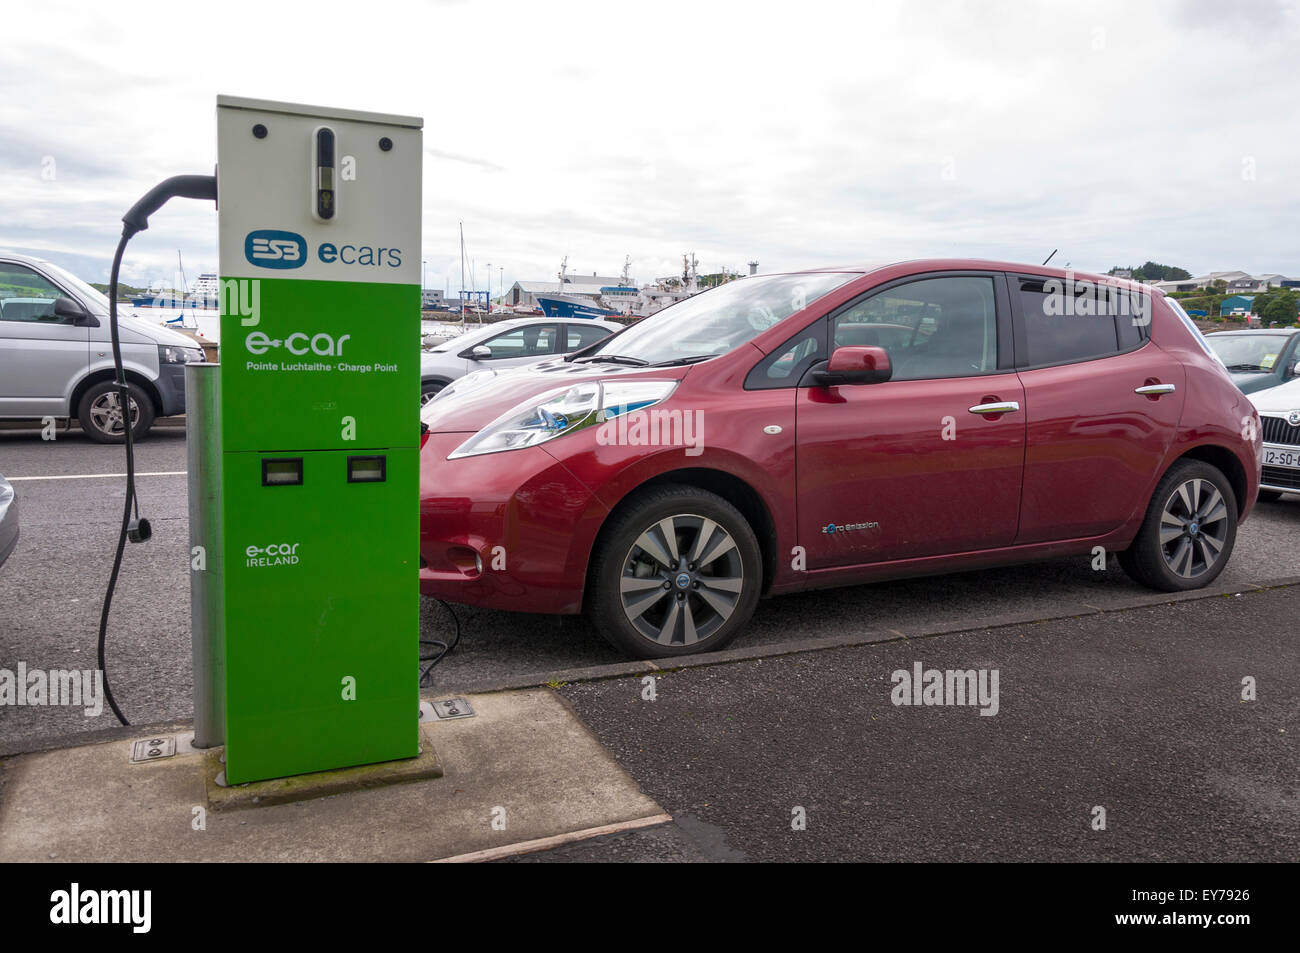 ESB e-car charge point in Killybegs, County Donegal, Ireland Stock Photo